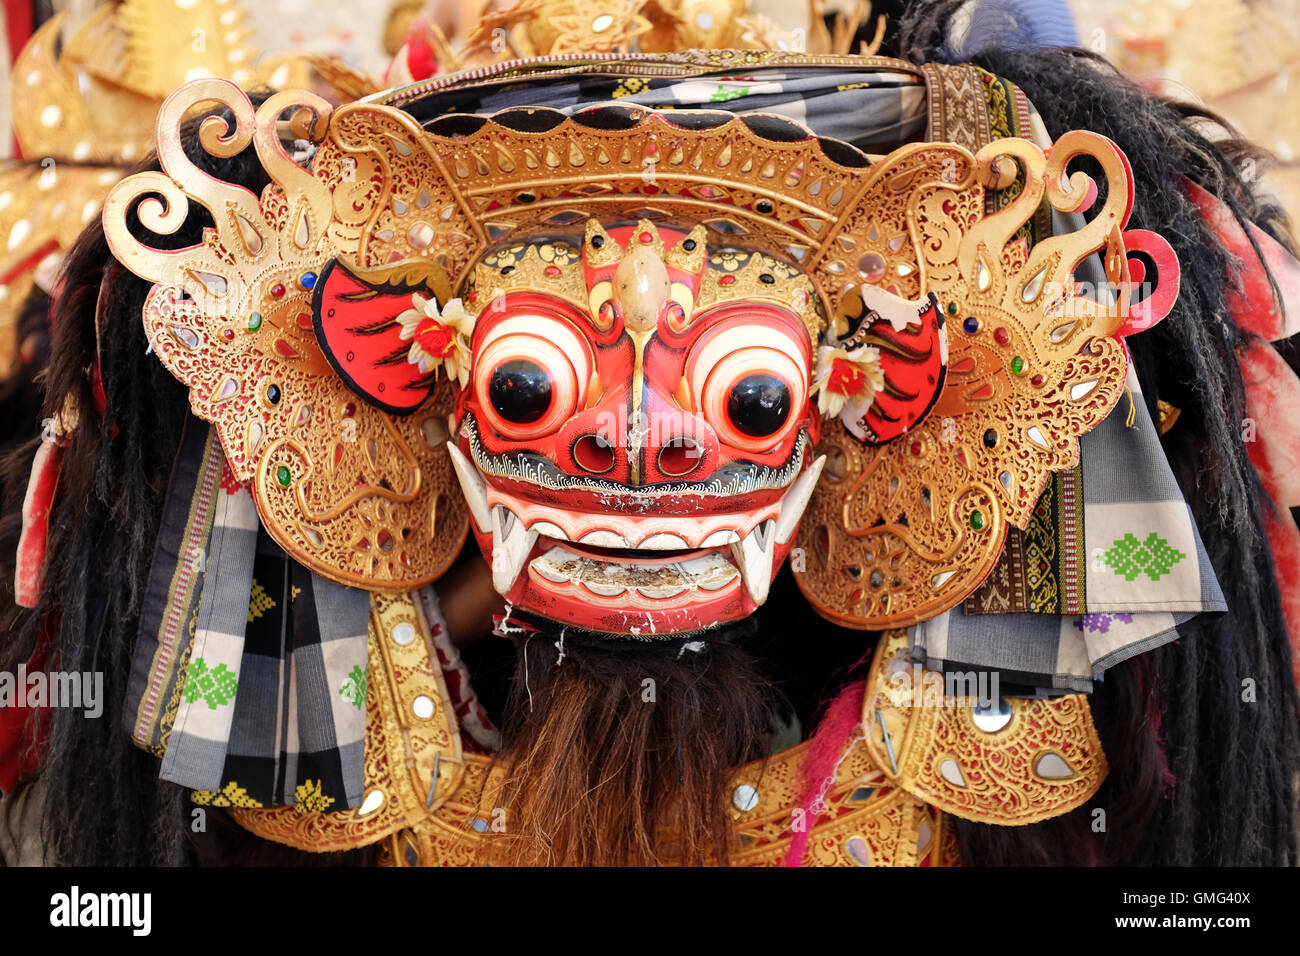 Frontal view of Barong, lion-like creature character in the mythology of Bali, Indonesia Stock Photo